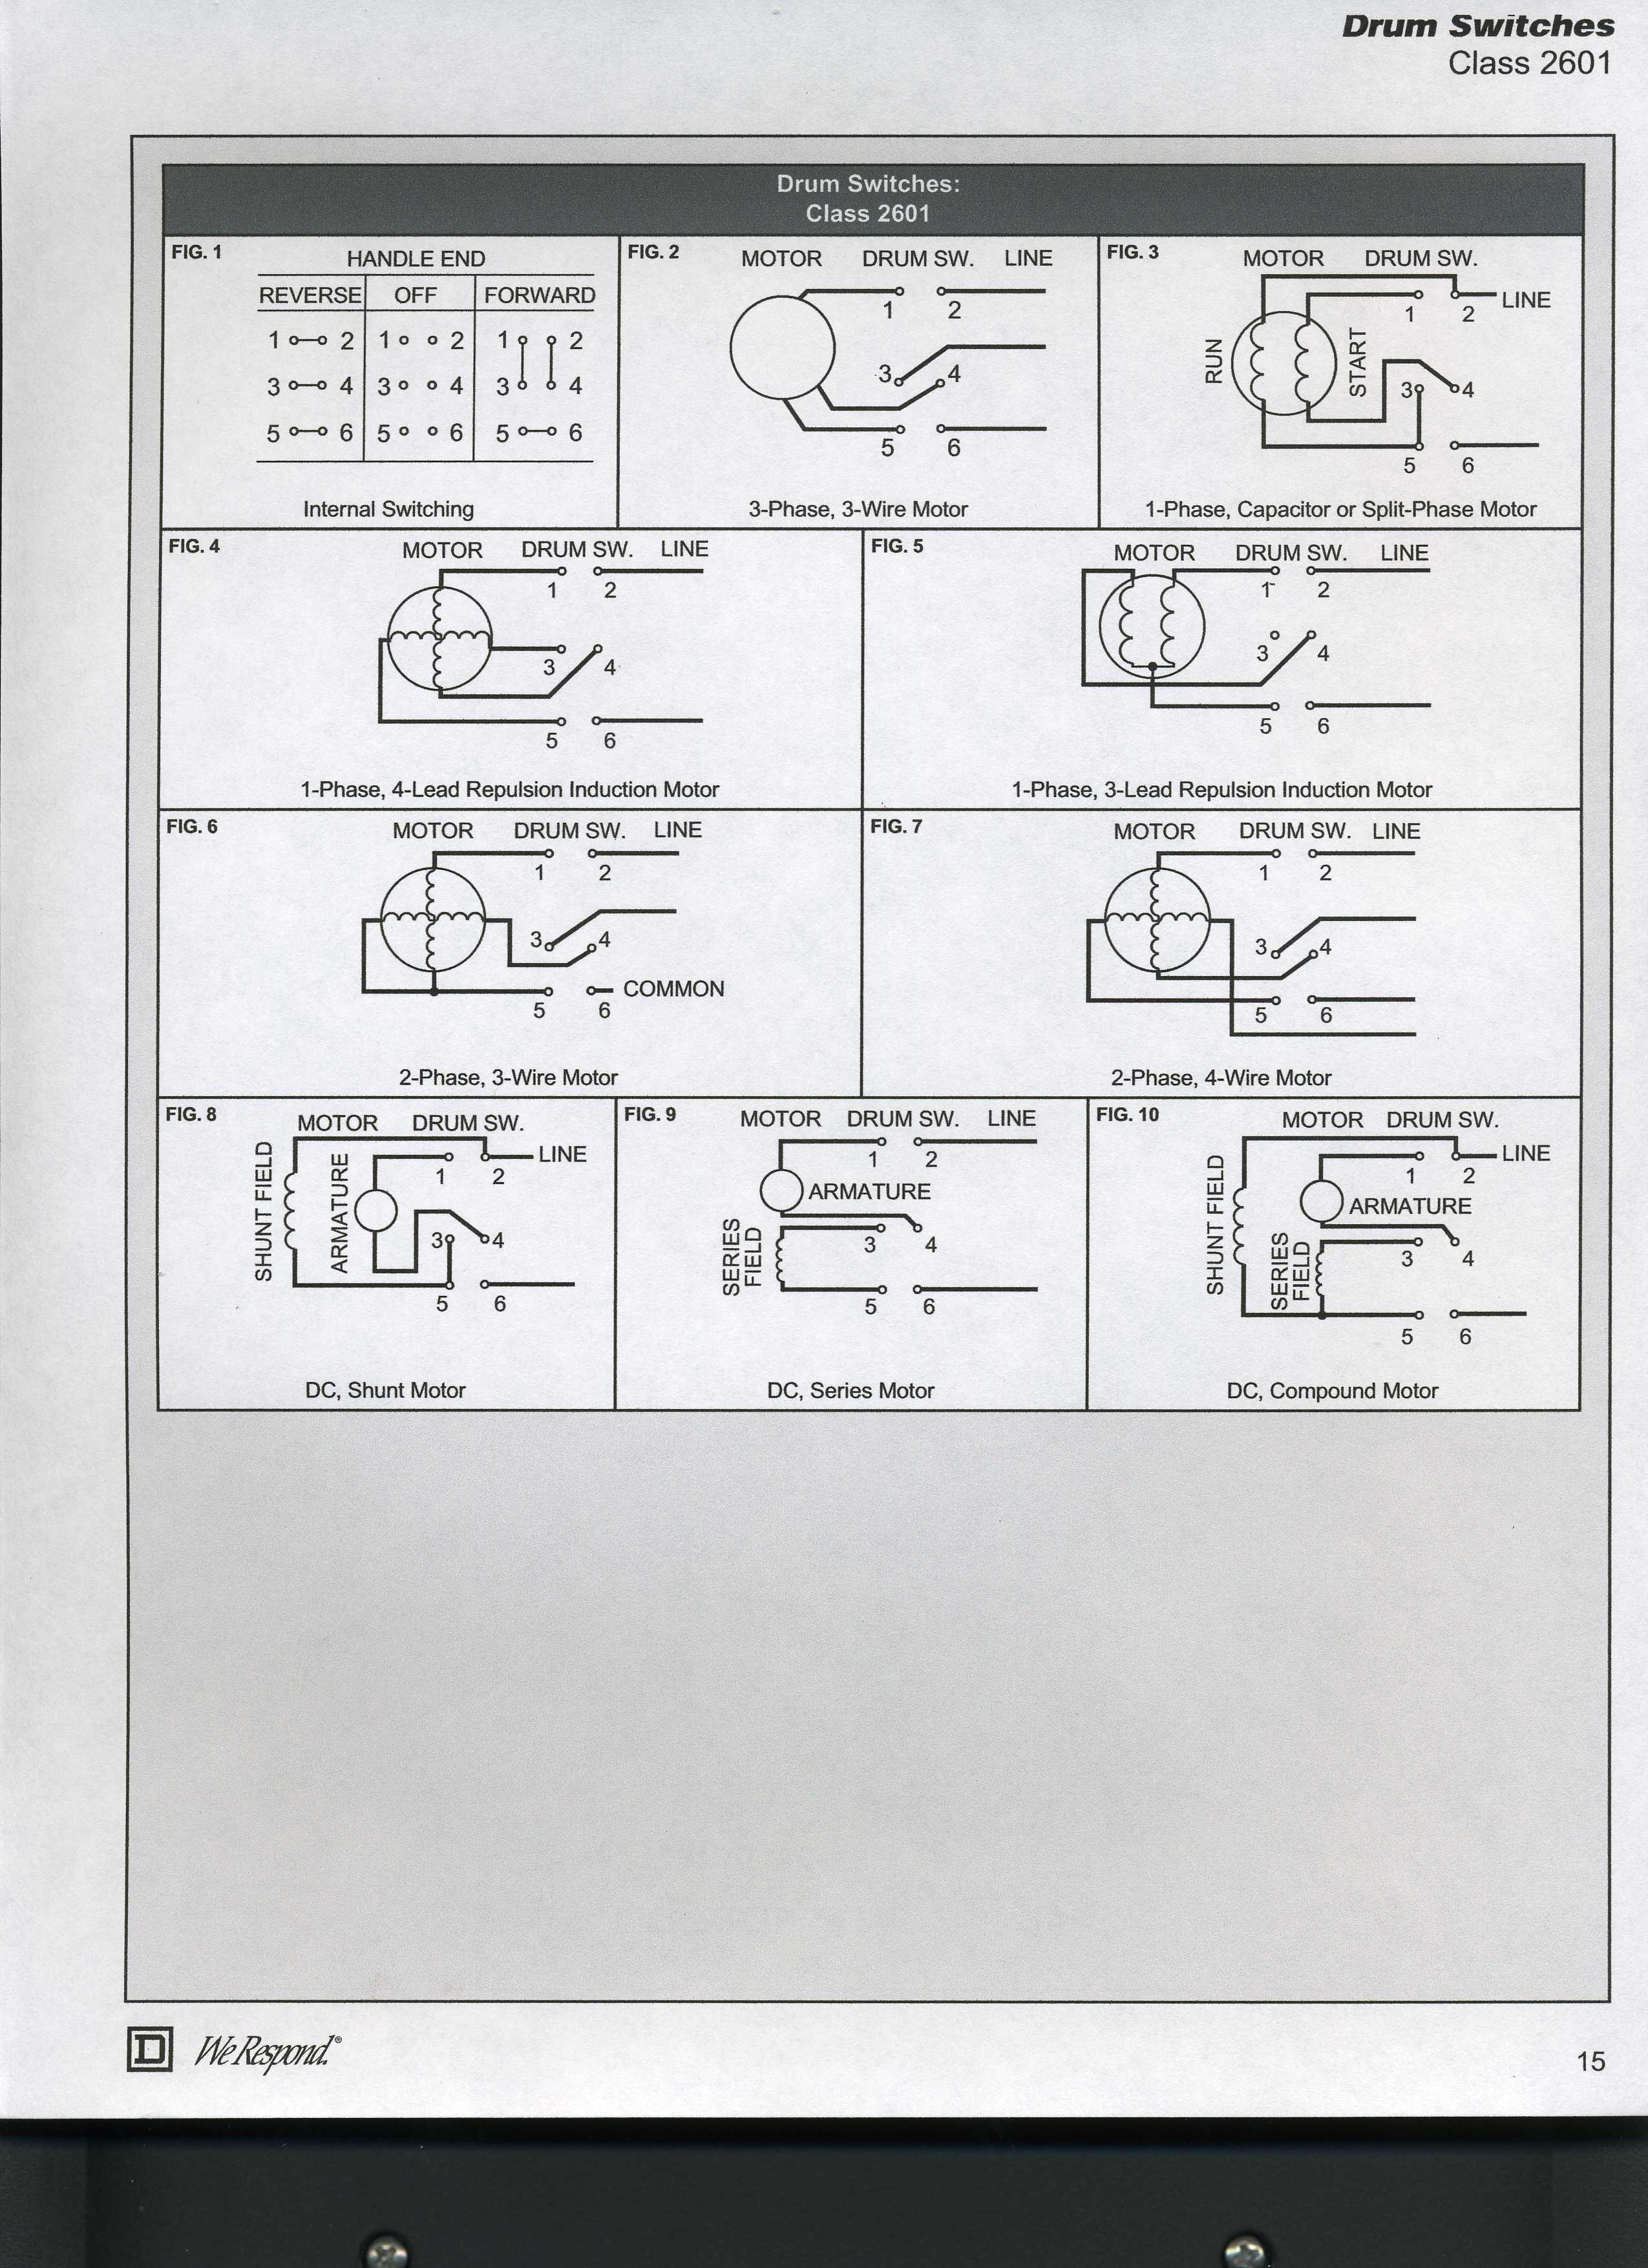 The Wiring Diagram For Reversing A V Electric Motor With Drum Switch electrical wire 12